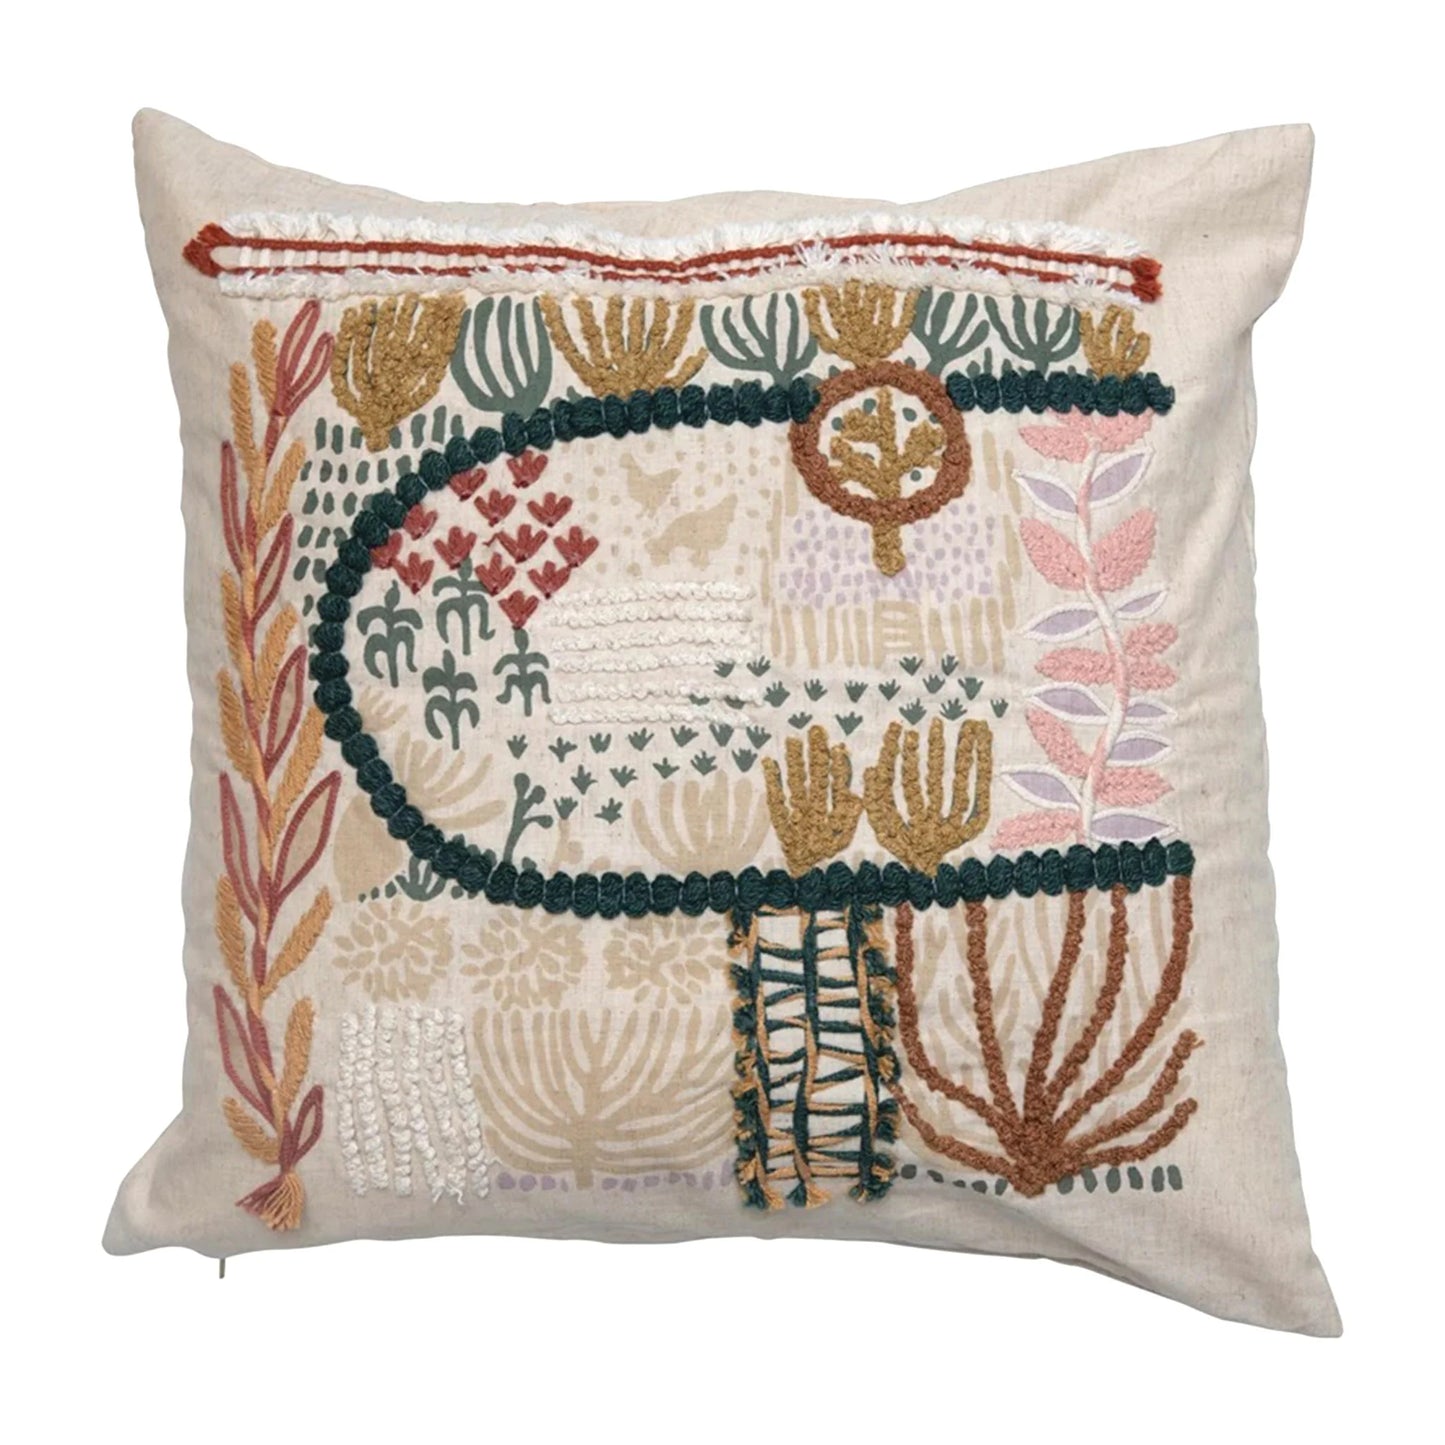 Embroidered Botanical Square Pillow